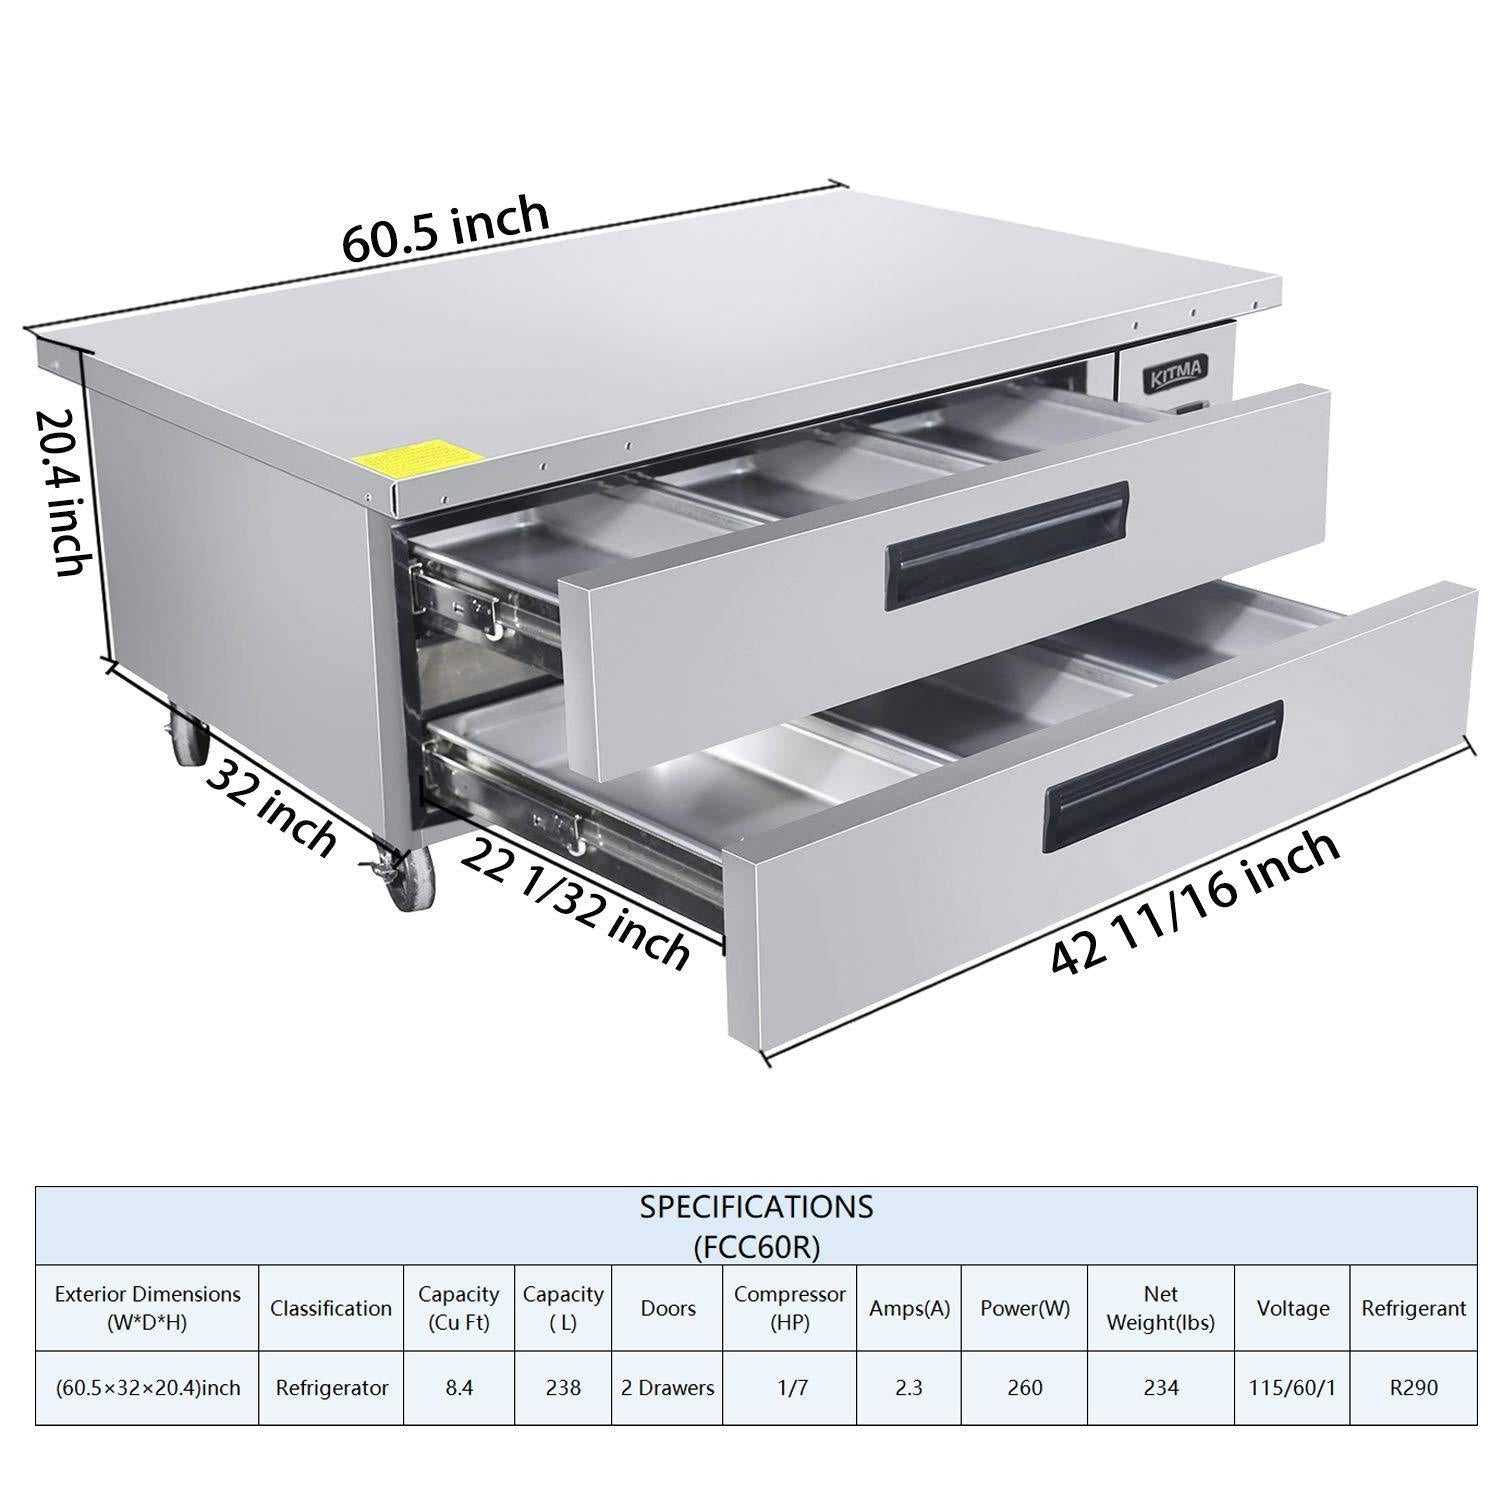 Storage organizer commercial 2 drawer refrigerated chef base kitma 60 inches stainless steel chef base work table refrigerator kitchen equipment stand 33 f 38 f